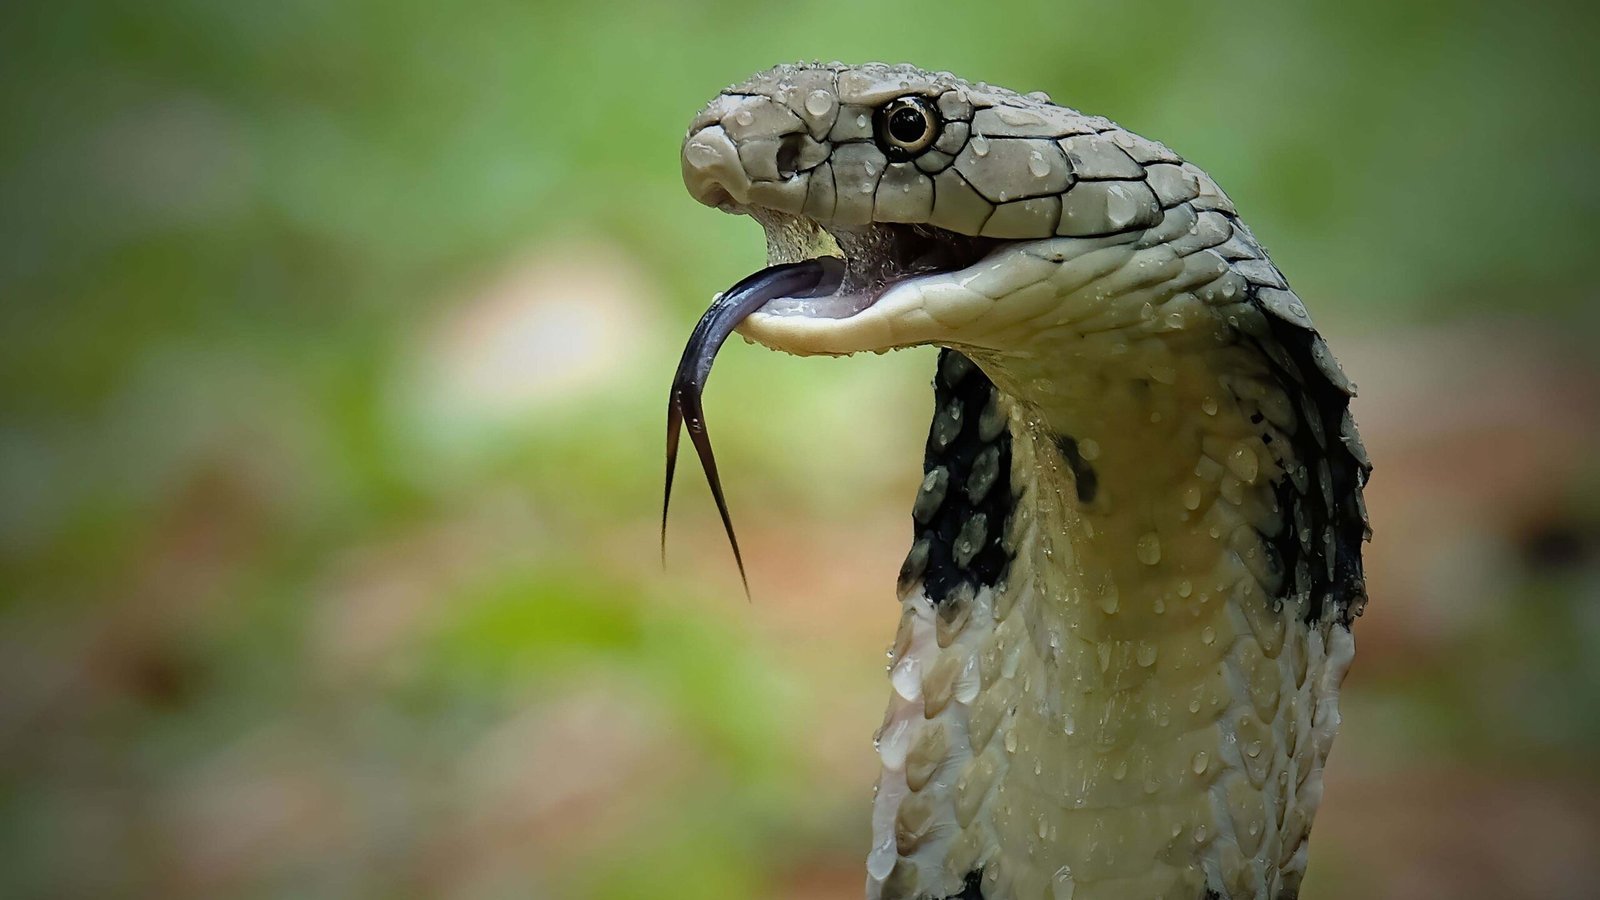 After all, at what speed does King Cobra chase its prey?